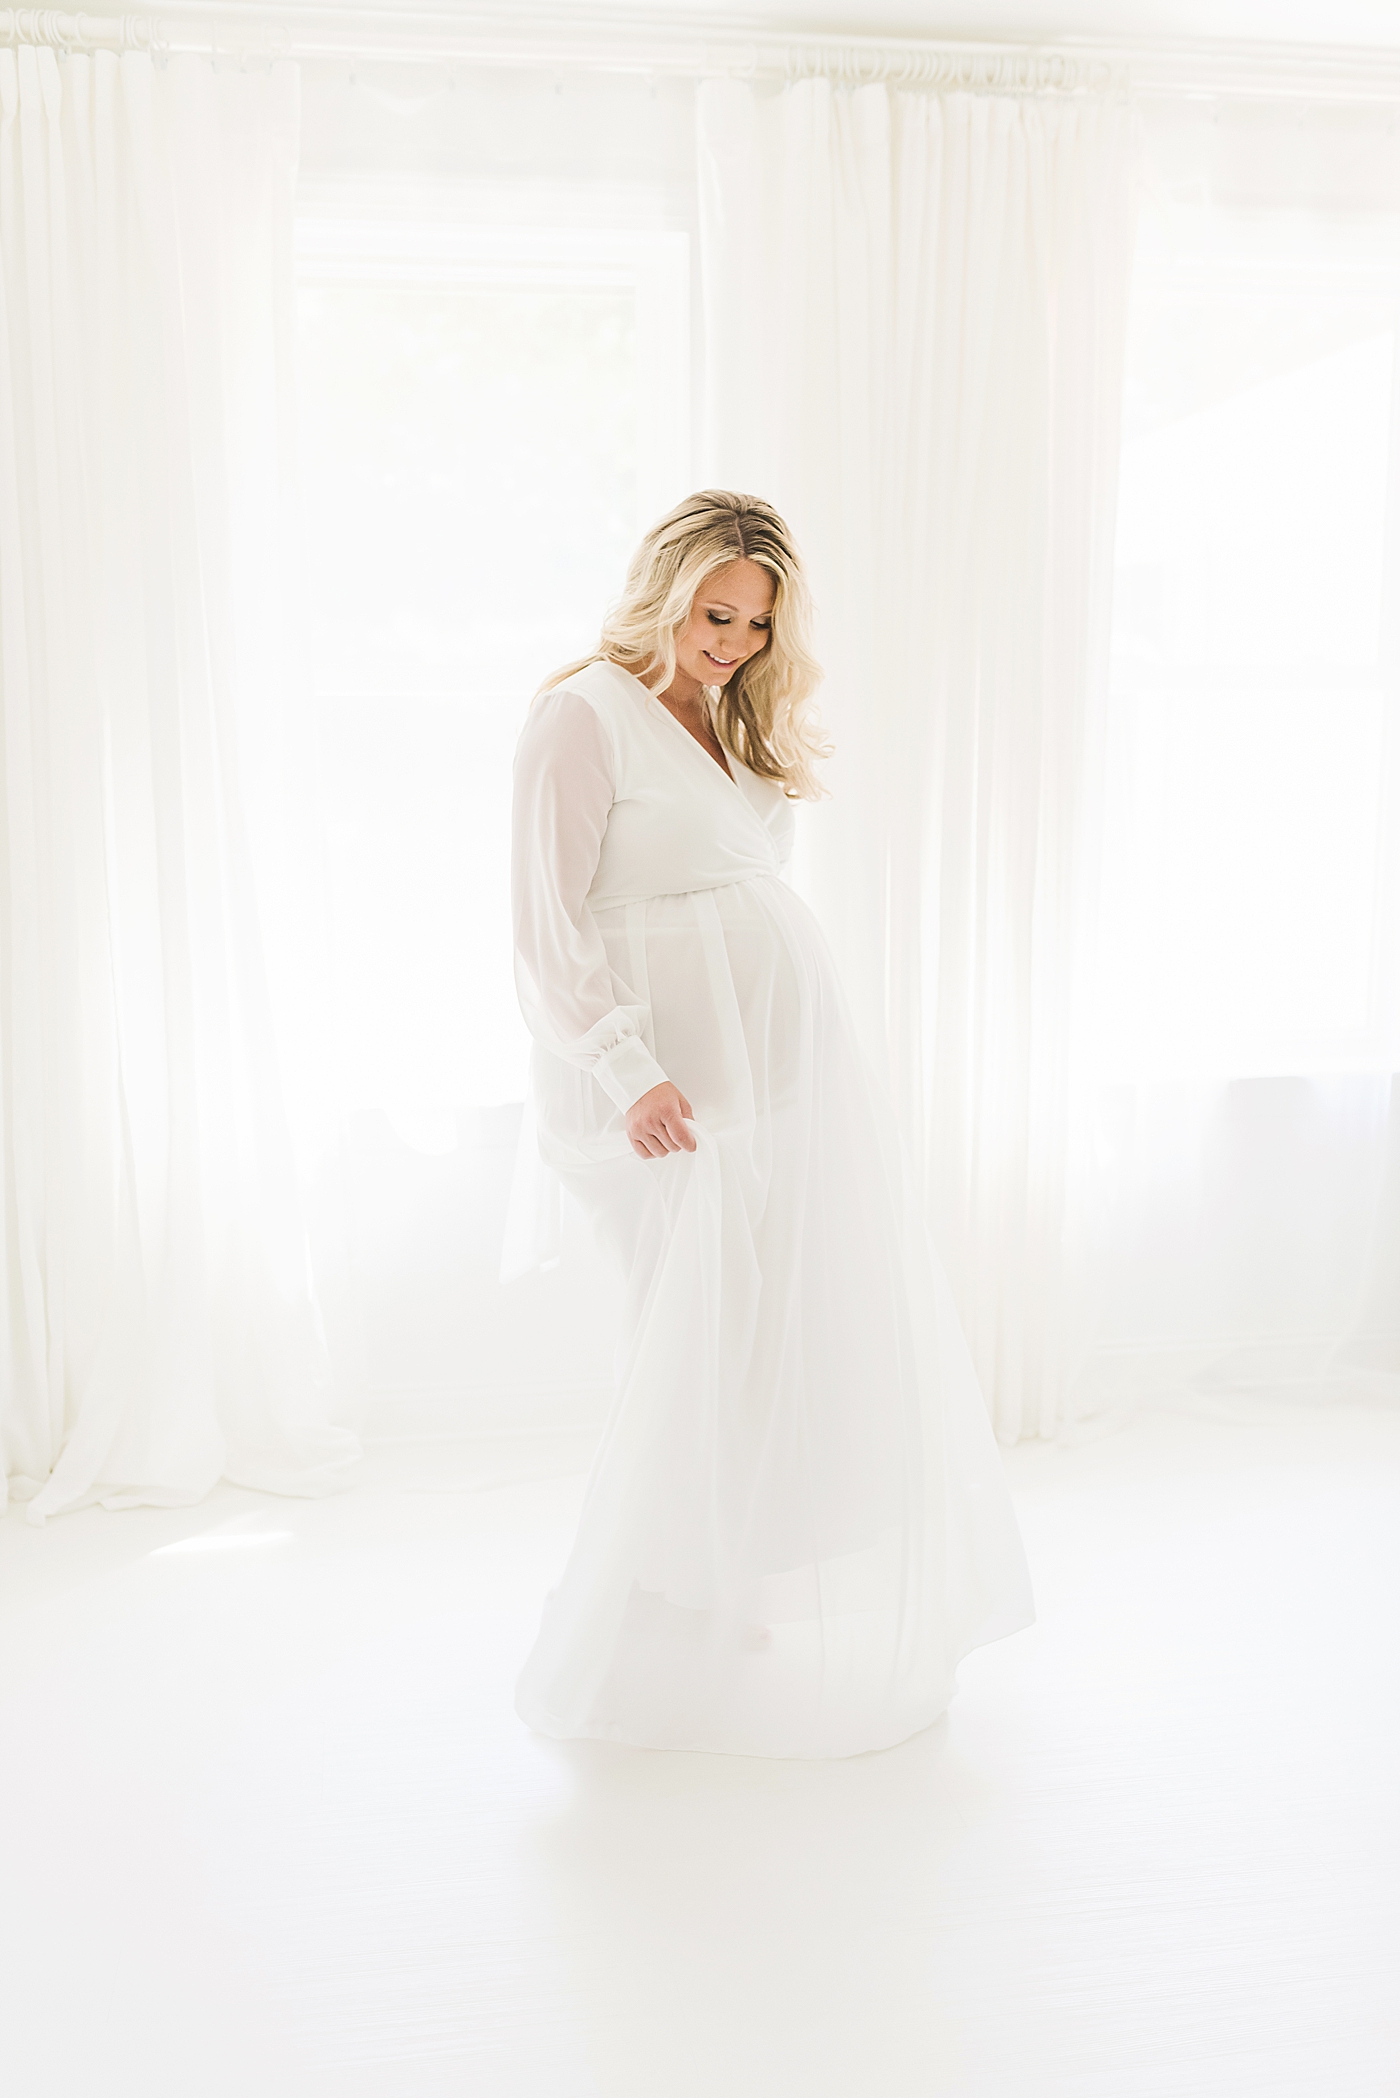 Mother to be twirling in sheer white dress | Photo by Anna Wisjo Photography